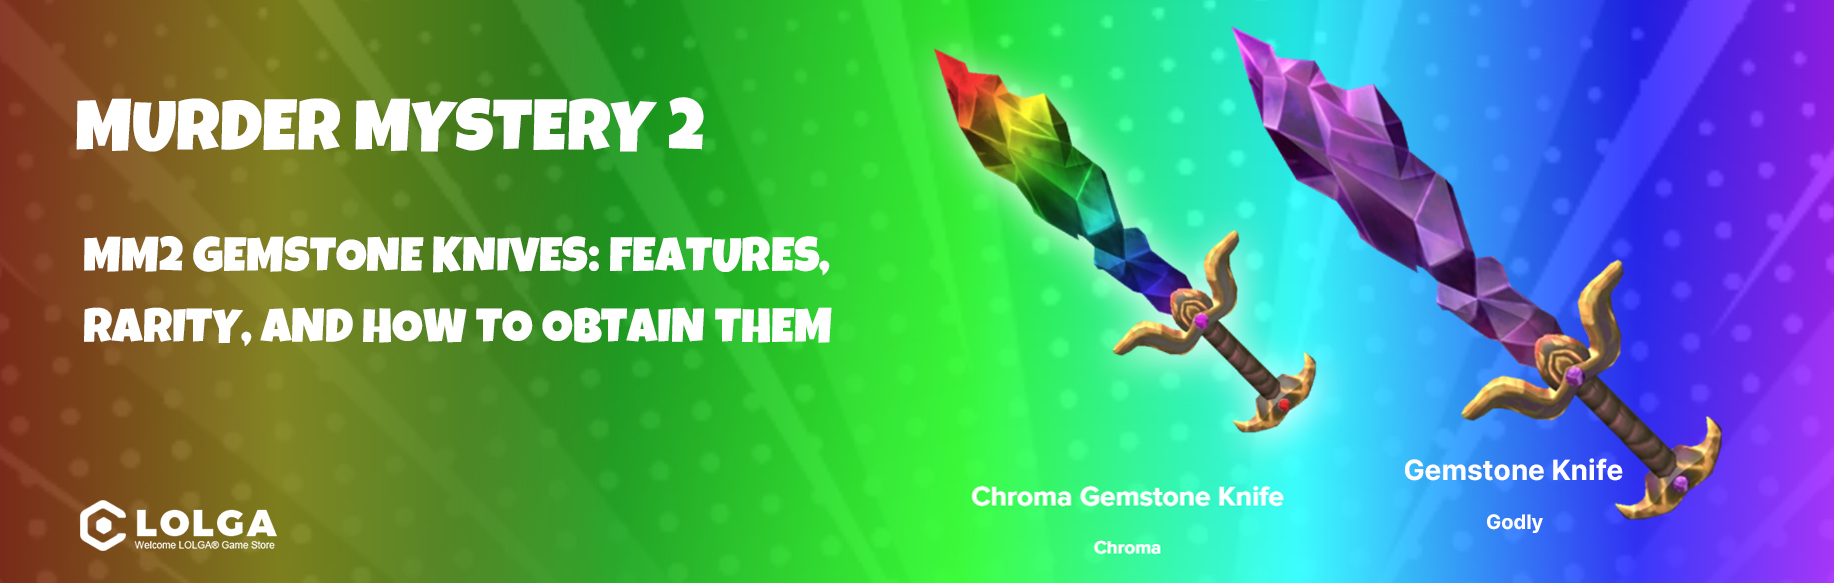 MM2 Gemstone Knives: Features, Rarity, and How to Obtain Them